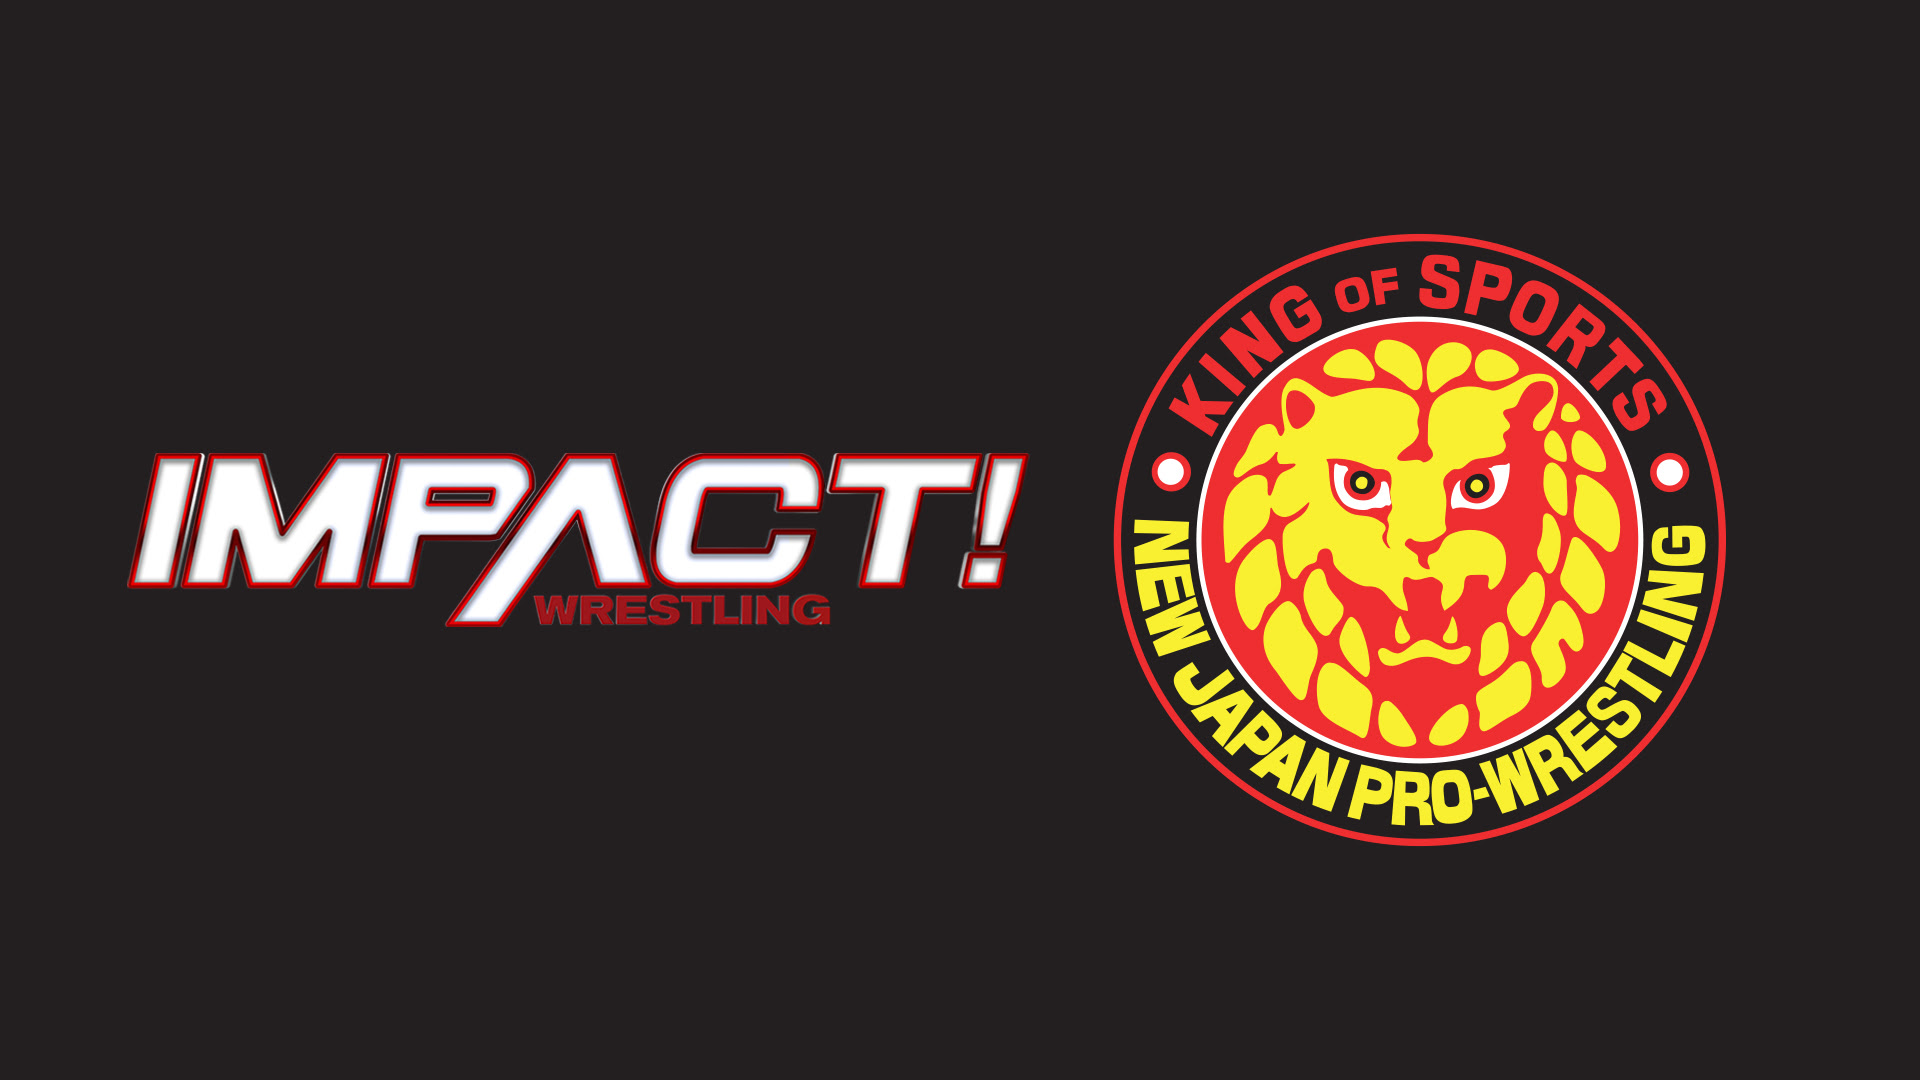 New Lineup Revealed for Upcoming Impact Wrestling Tapings, Plus Notable Signing of Walker Stewart by NJPW